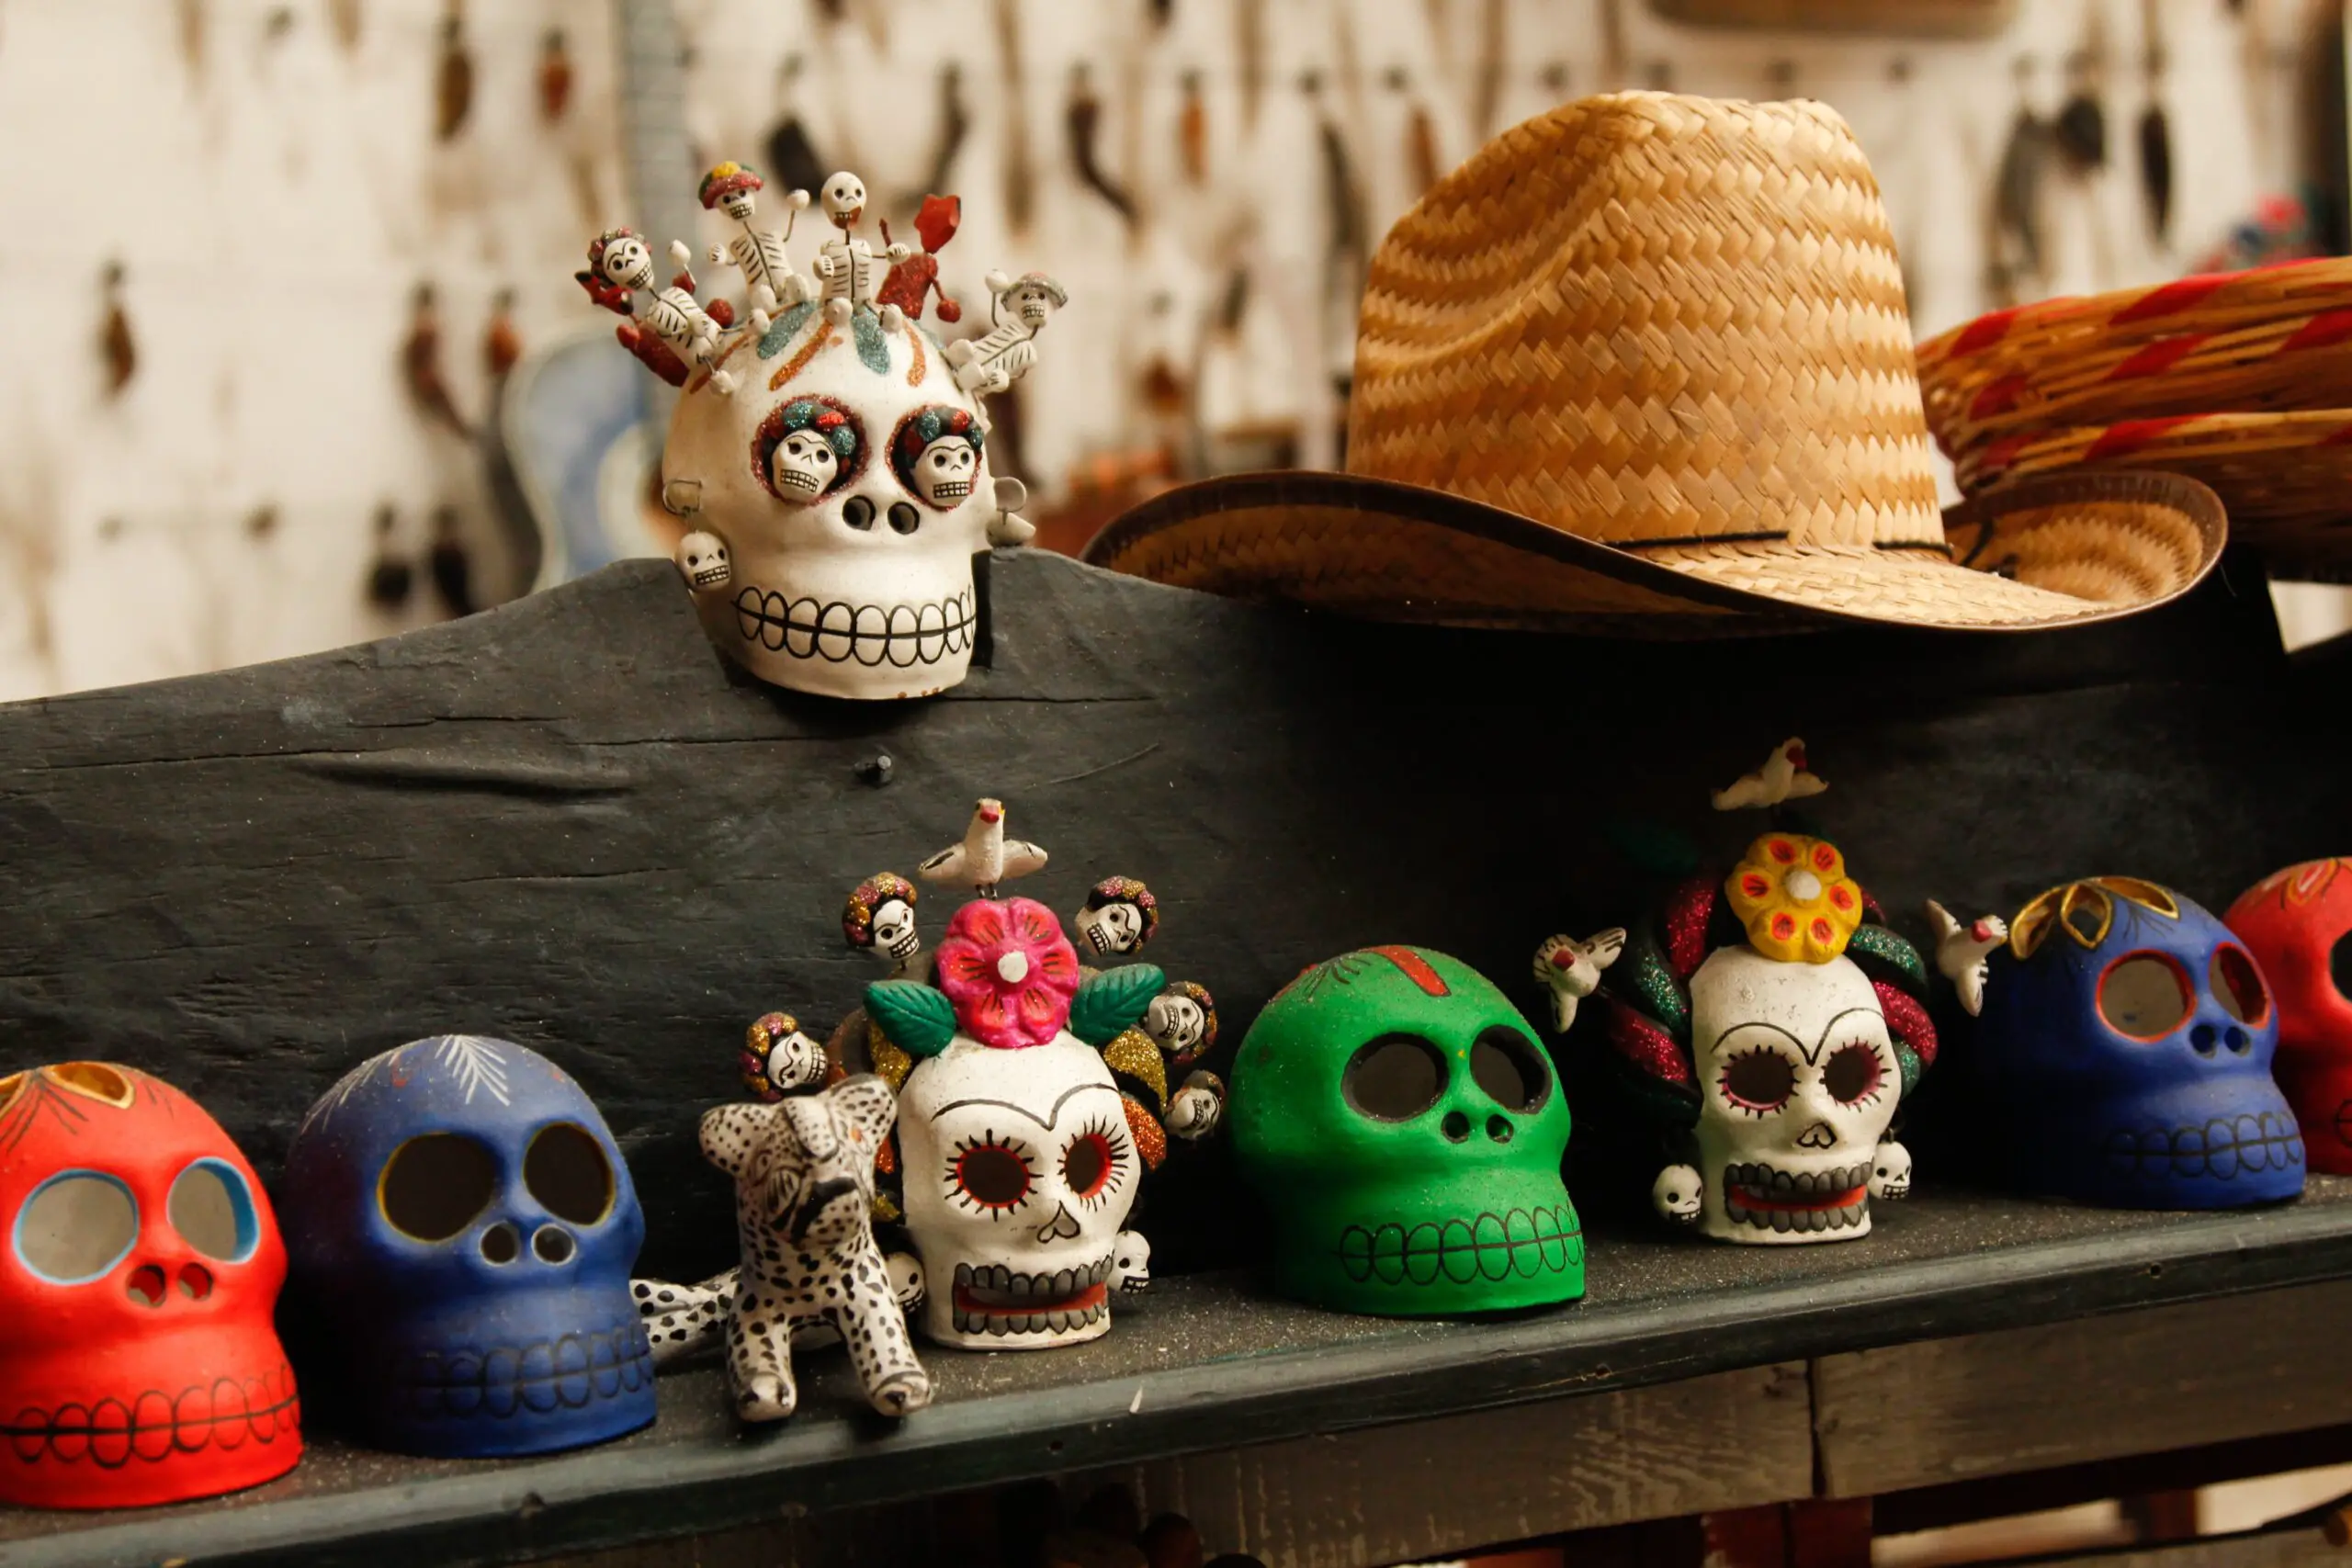 Celebrating the Day of the Dead in Oaxaca, Mexico